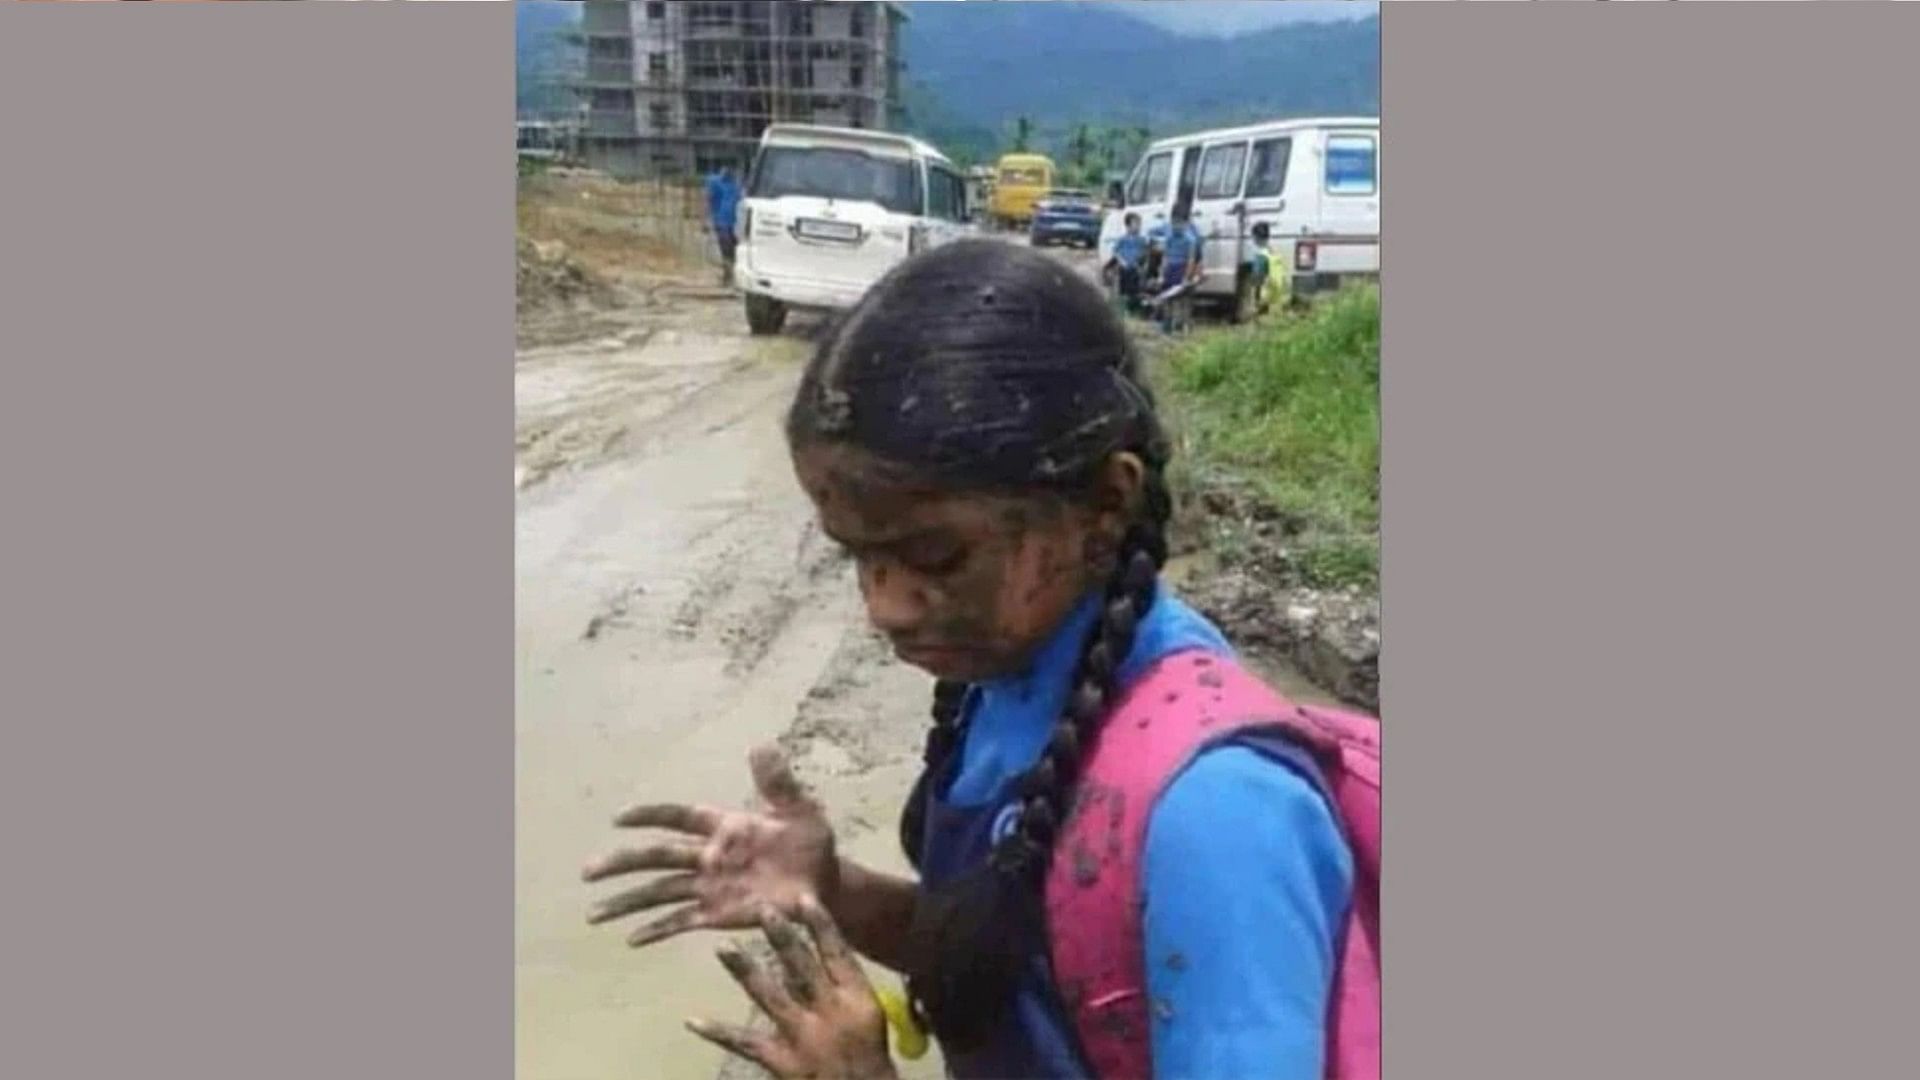 school girl in uniform with dirt on her face  IAS officer shared viral rash driving picture